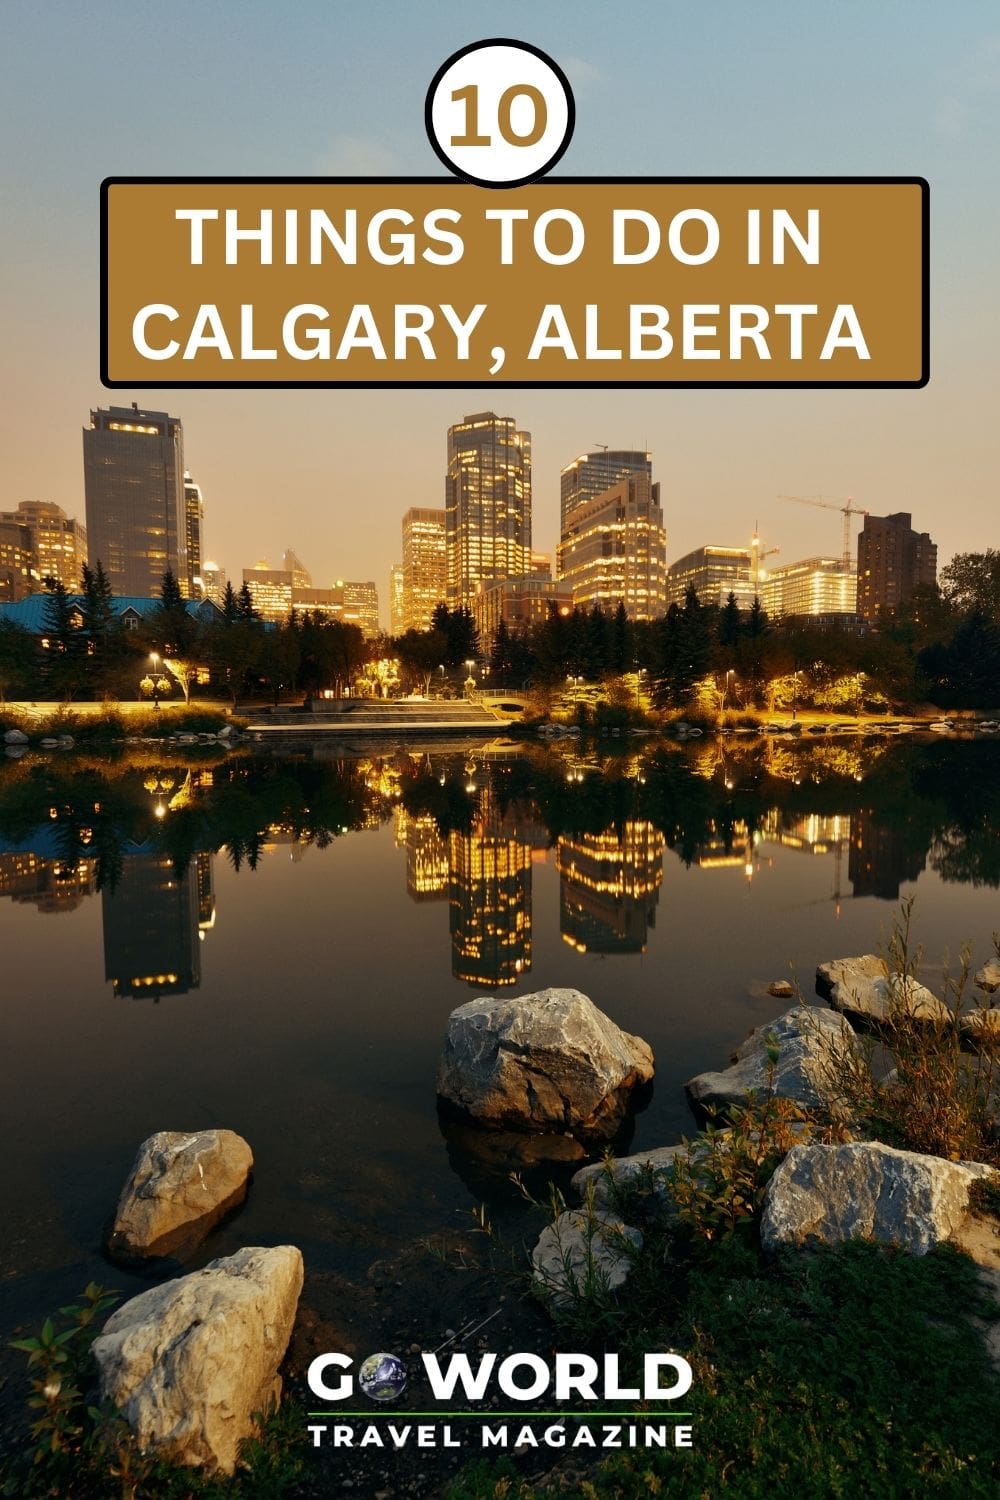 Things to do in Calgary Canada